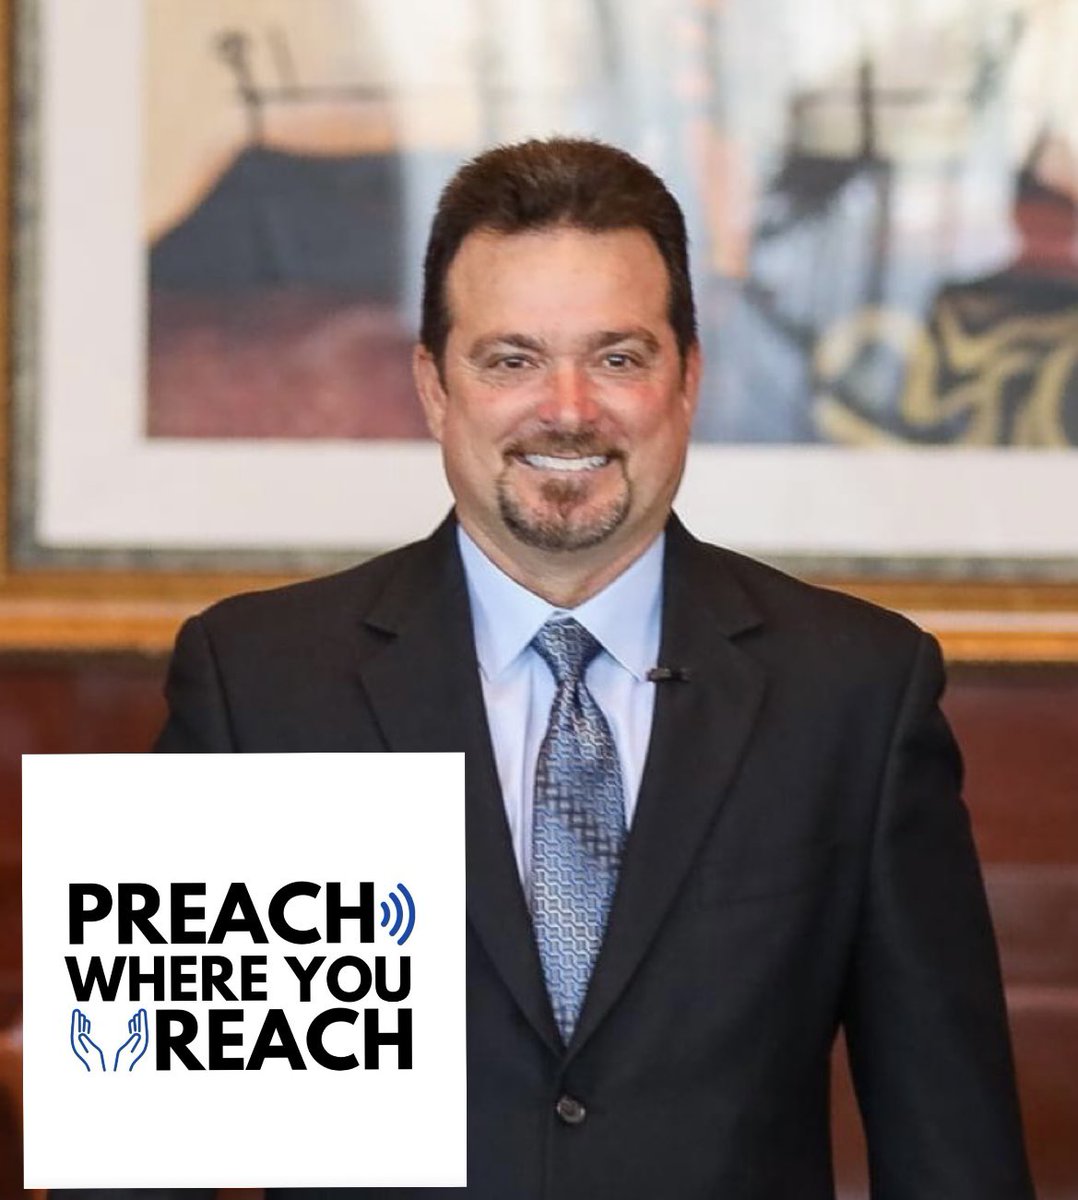 New “Preach Where You Reach Podcast” episode out now! Sean LaGasse, an entrepreneur & pastor, shares how the Miami Dolphins helped change  his faith trajectory, and his entrepreneurial and faith journey. 
 #Faith #podcast #entrepreneur #PWYR https://t.co/q8qC9Kdsef